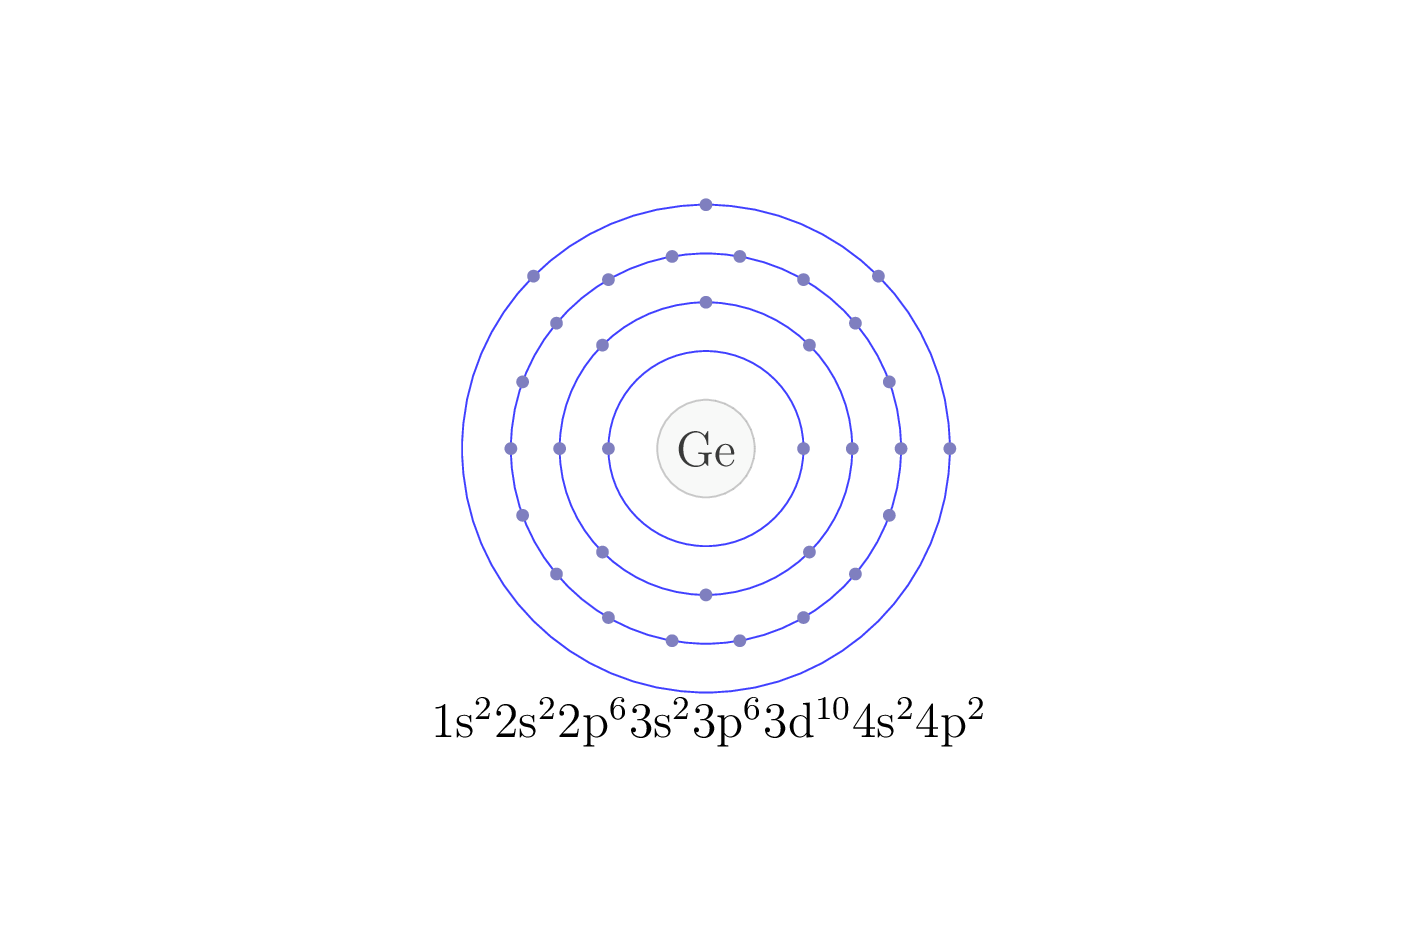 electron configuration of element Ge